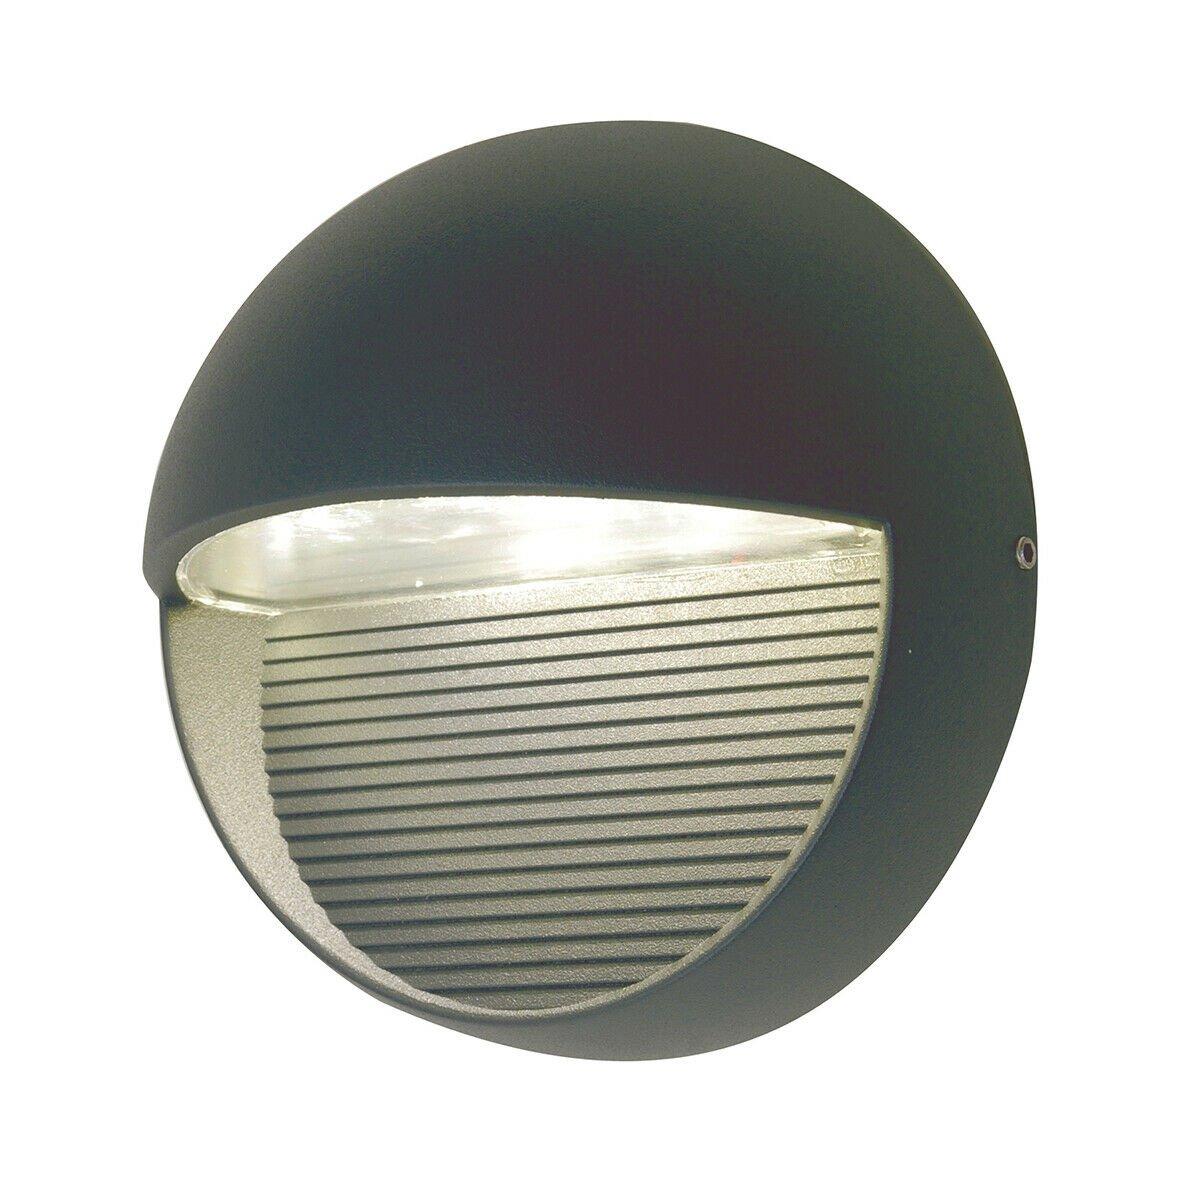 Outdoor IP54 Wall Light Sconce Graphite Finish LED 6W Bulb External d01052